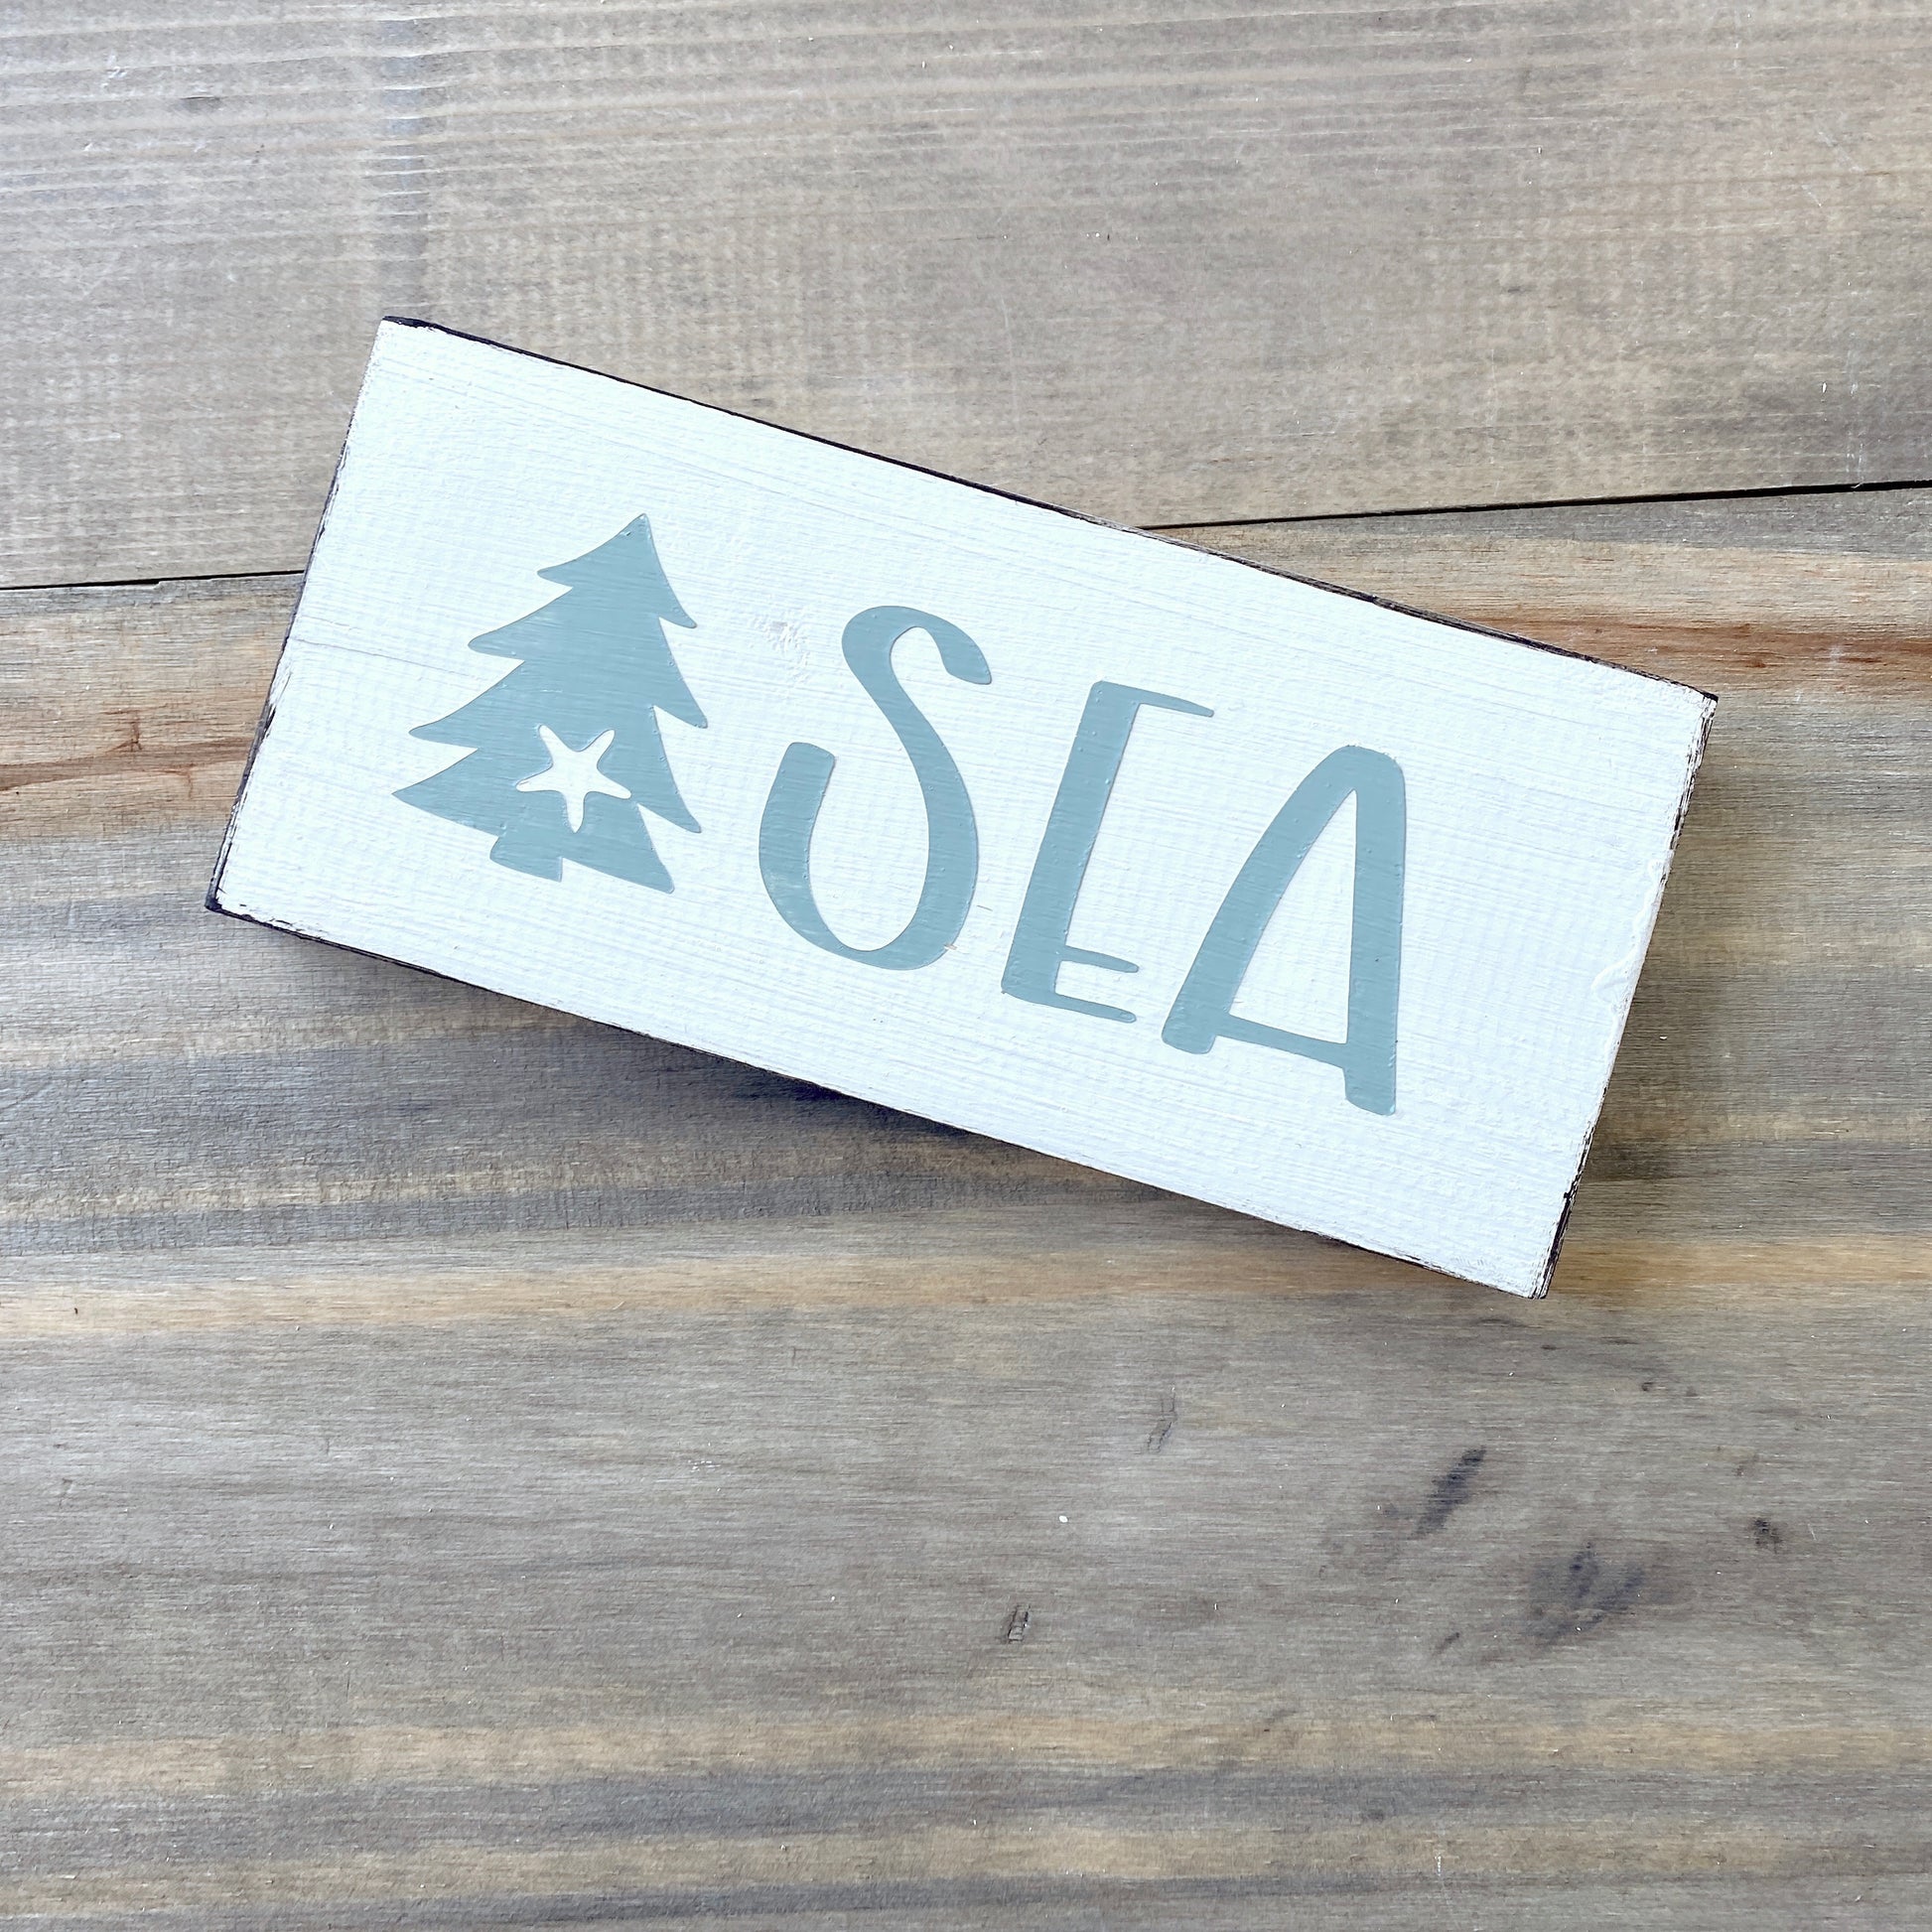 Coastal Christmas Decor, Anchored Soul Designs Sea Christmas wood sign with small tree and starfish white background with sage green design, beach house holiday decor coastal design